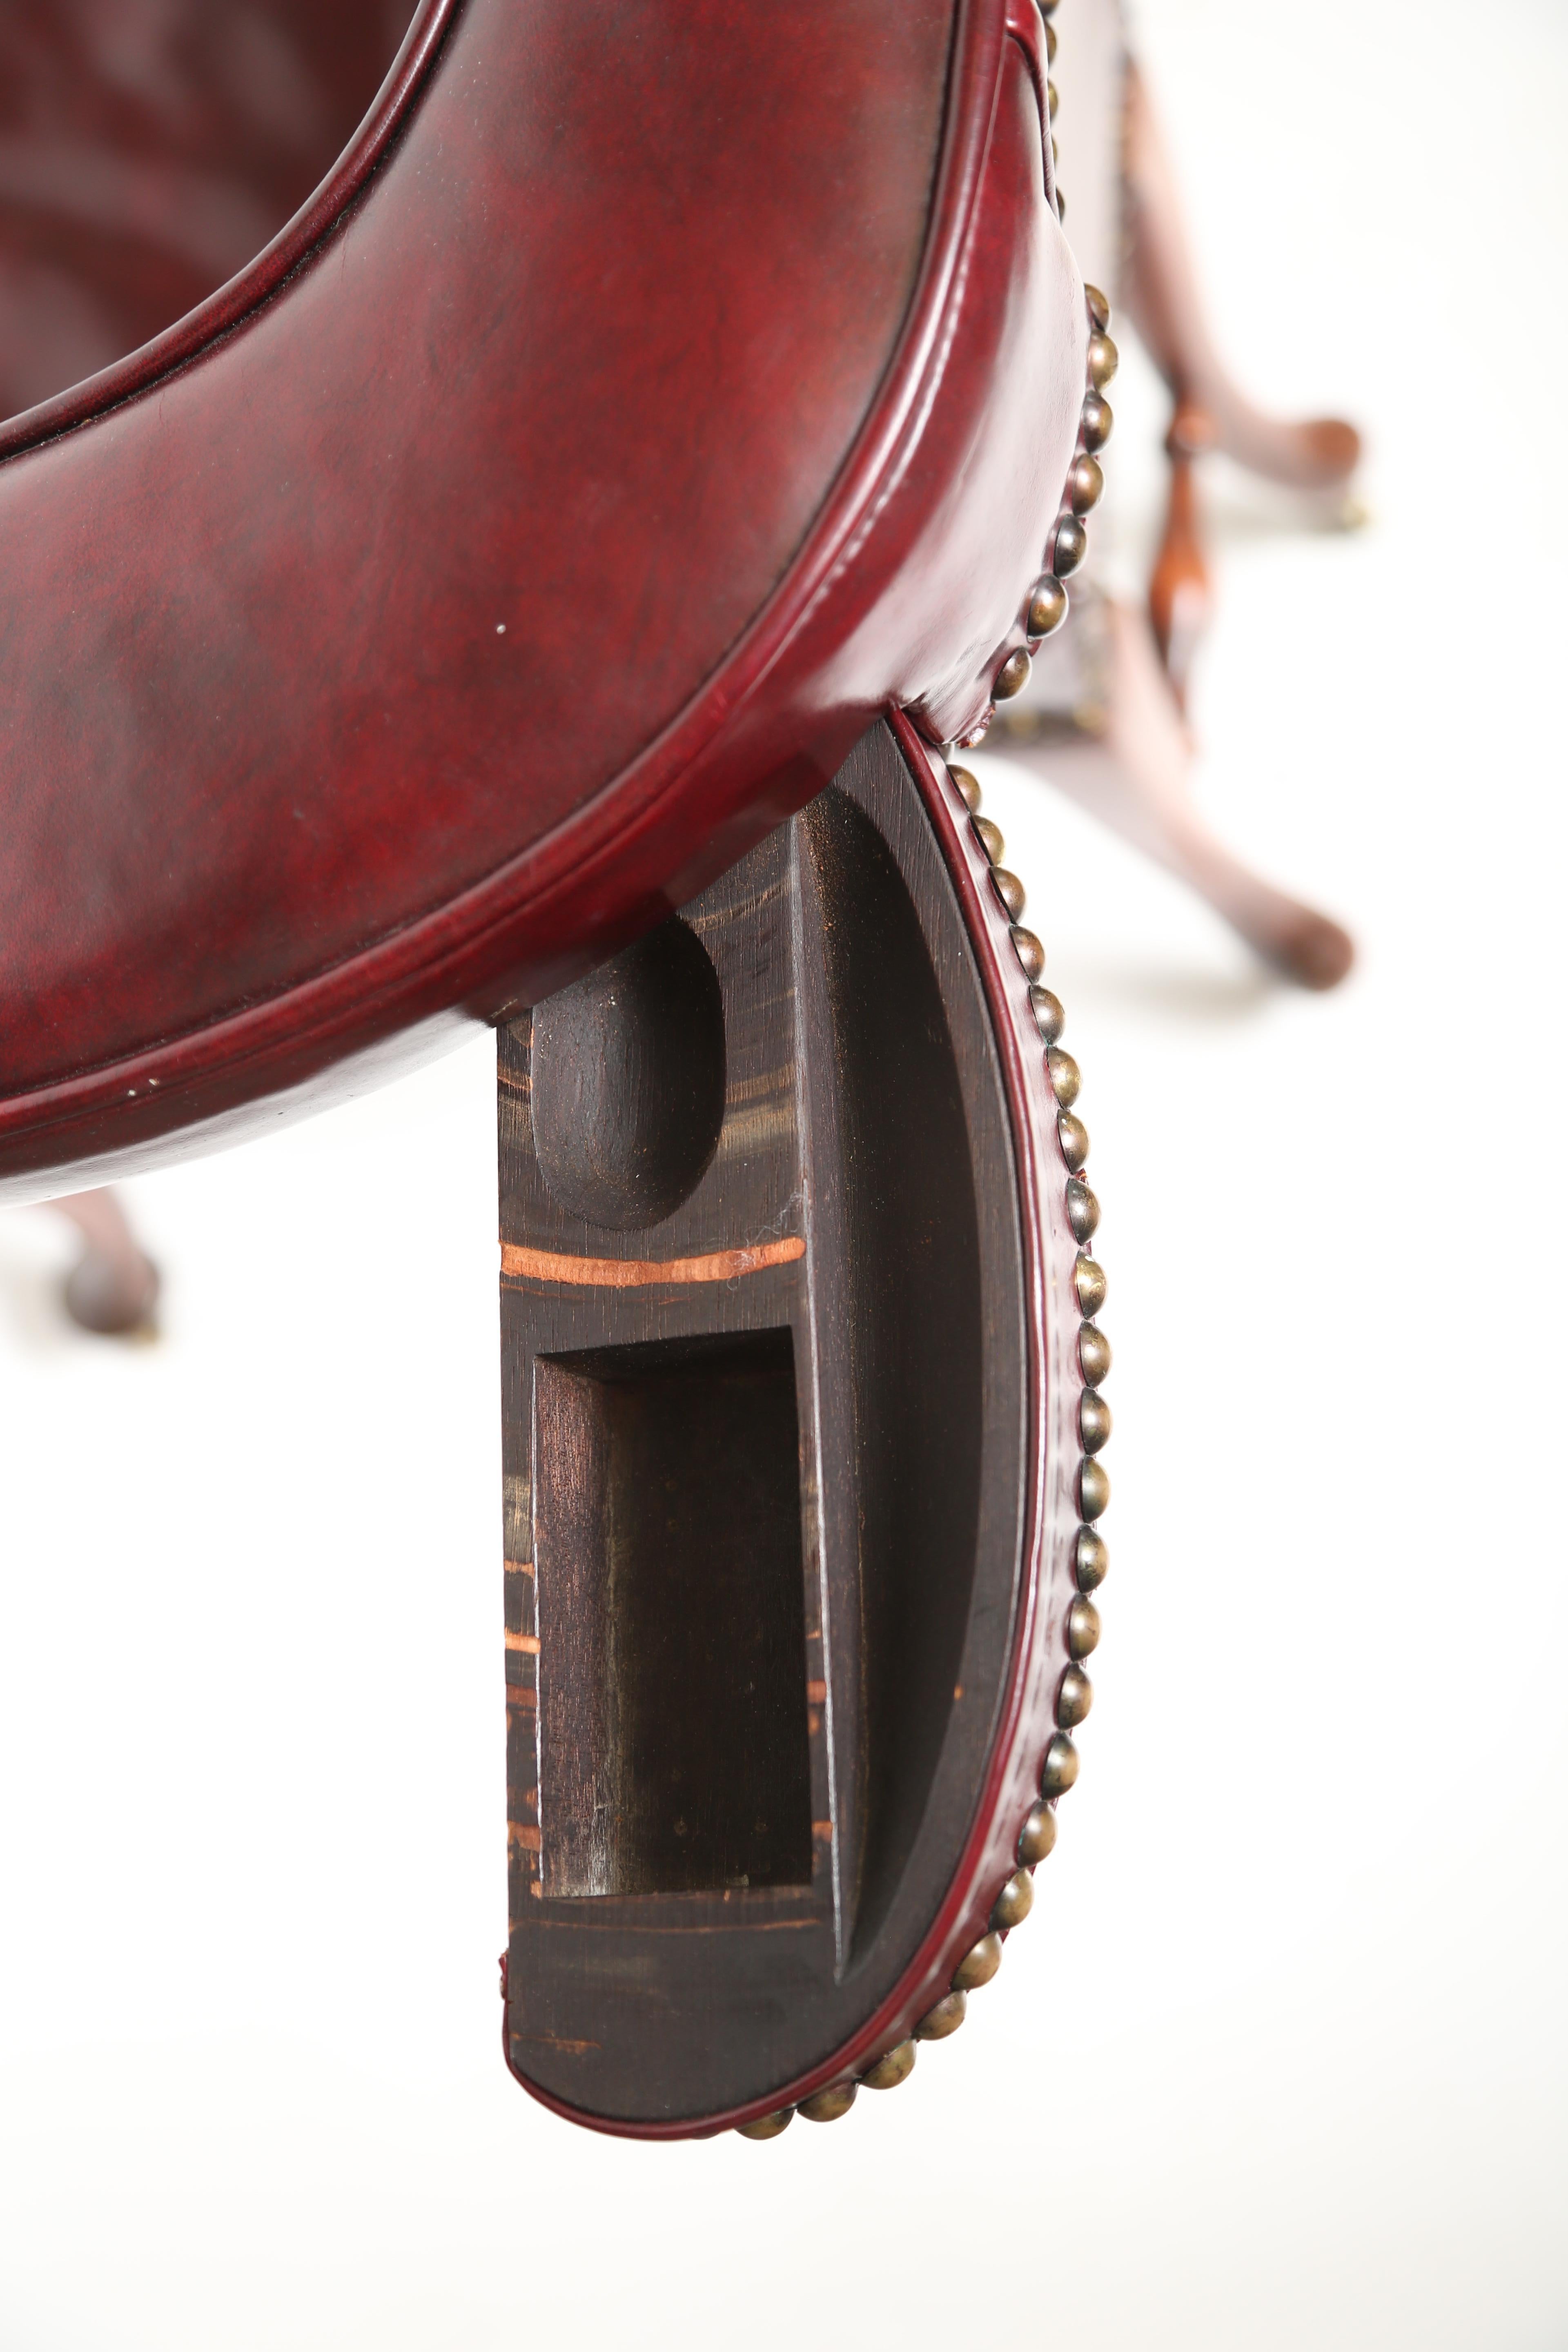 English Cock Fighting Chair-Mahogany, Red Leather, Brass Nailheads-Eng., 19th c 2